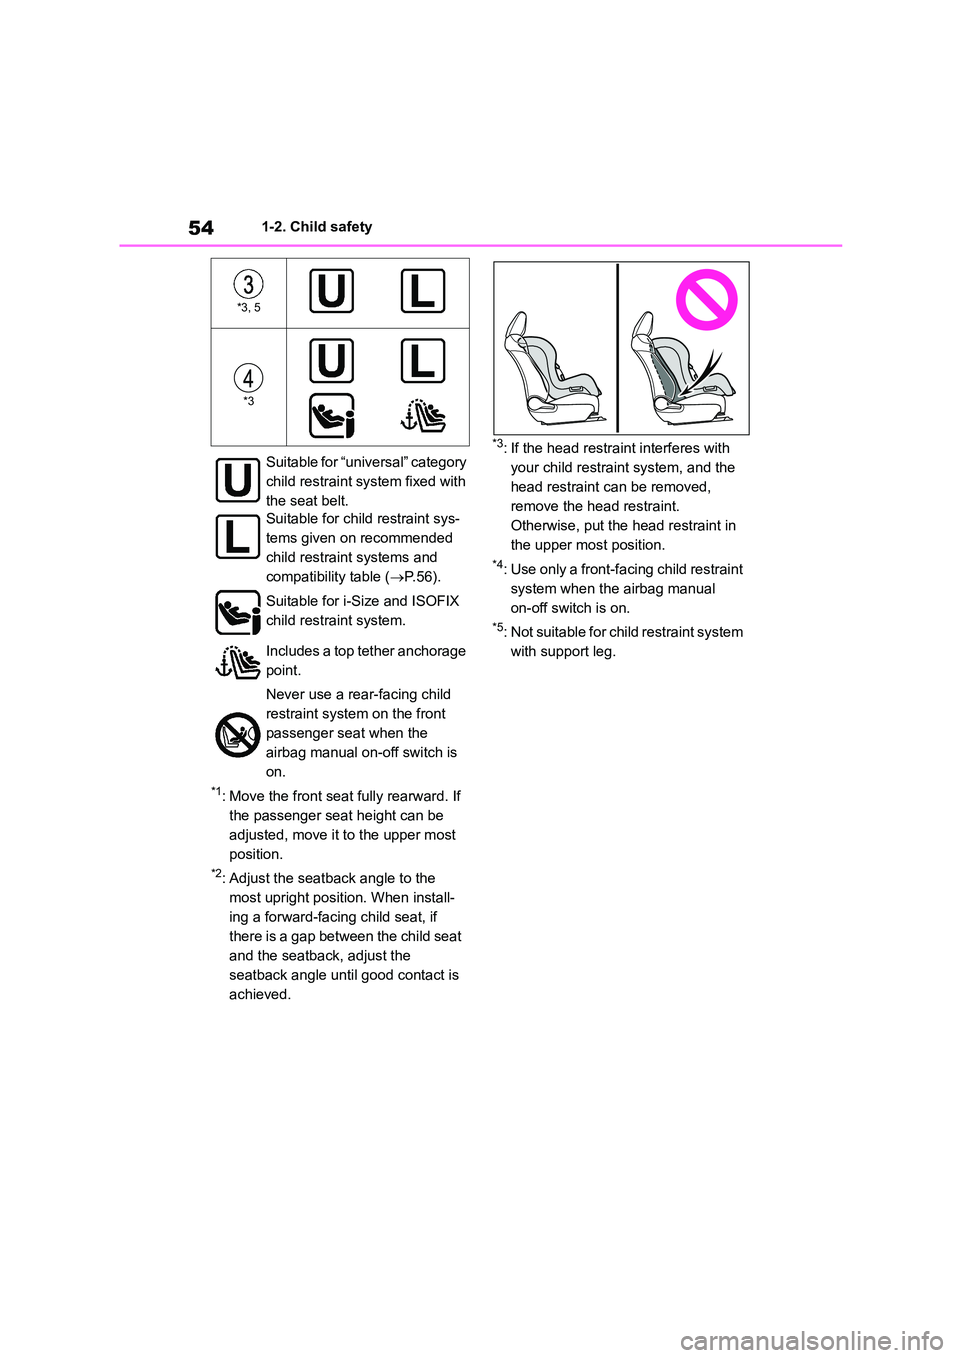 TOYOTA COROLLA 2022  Owners Manual (in English) 541-2. Child safety
*1: Move the front seat fully rearward. If  
the passenger seat height can be 
adjusted, move it to the upper most 
position.
*2: Adjust the seatback angle to the 
most upright pos